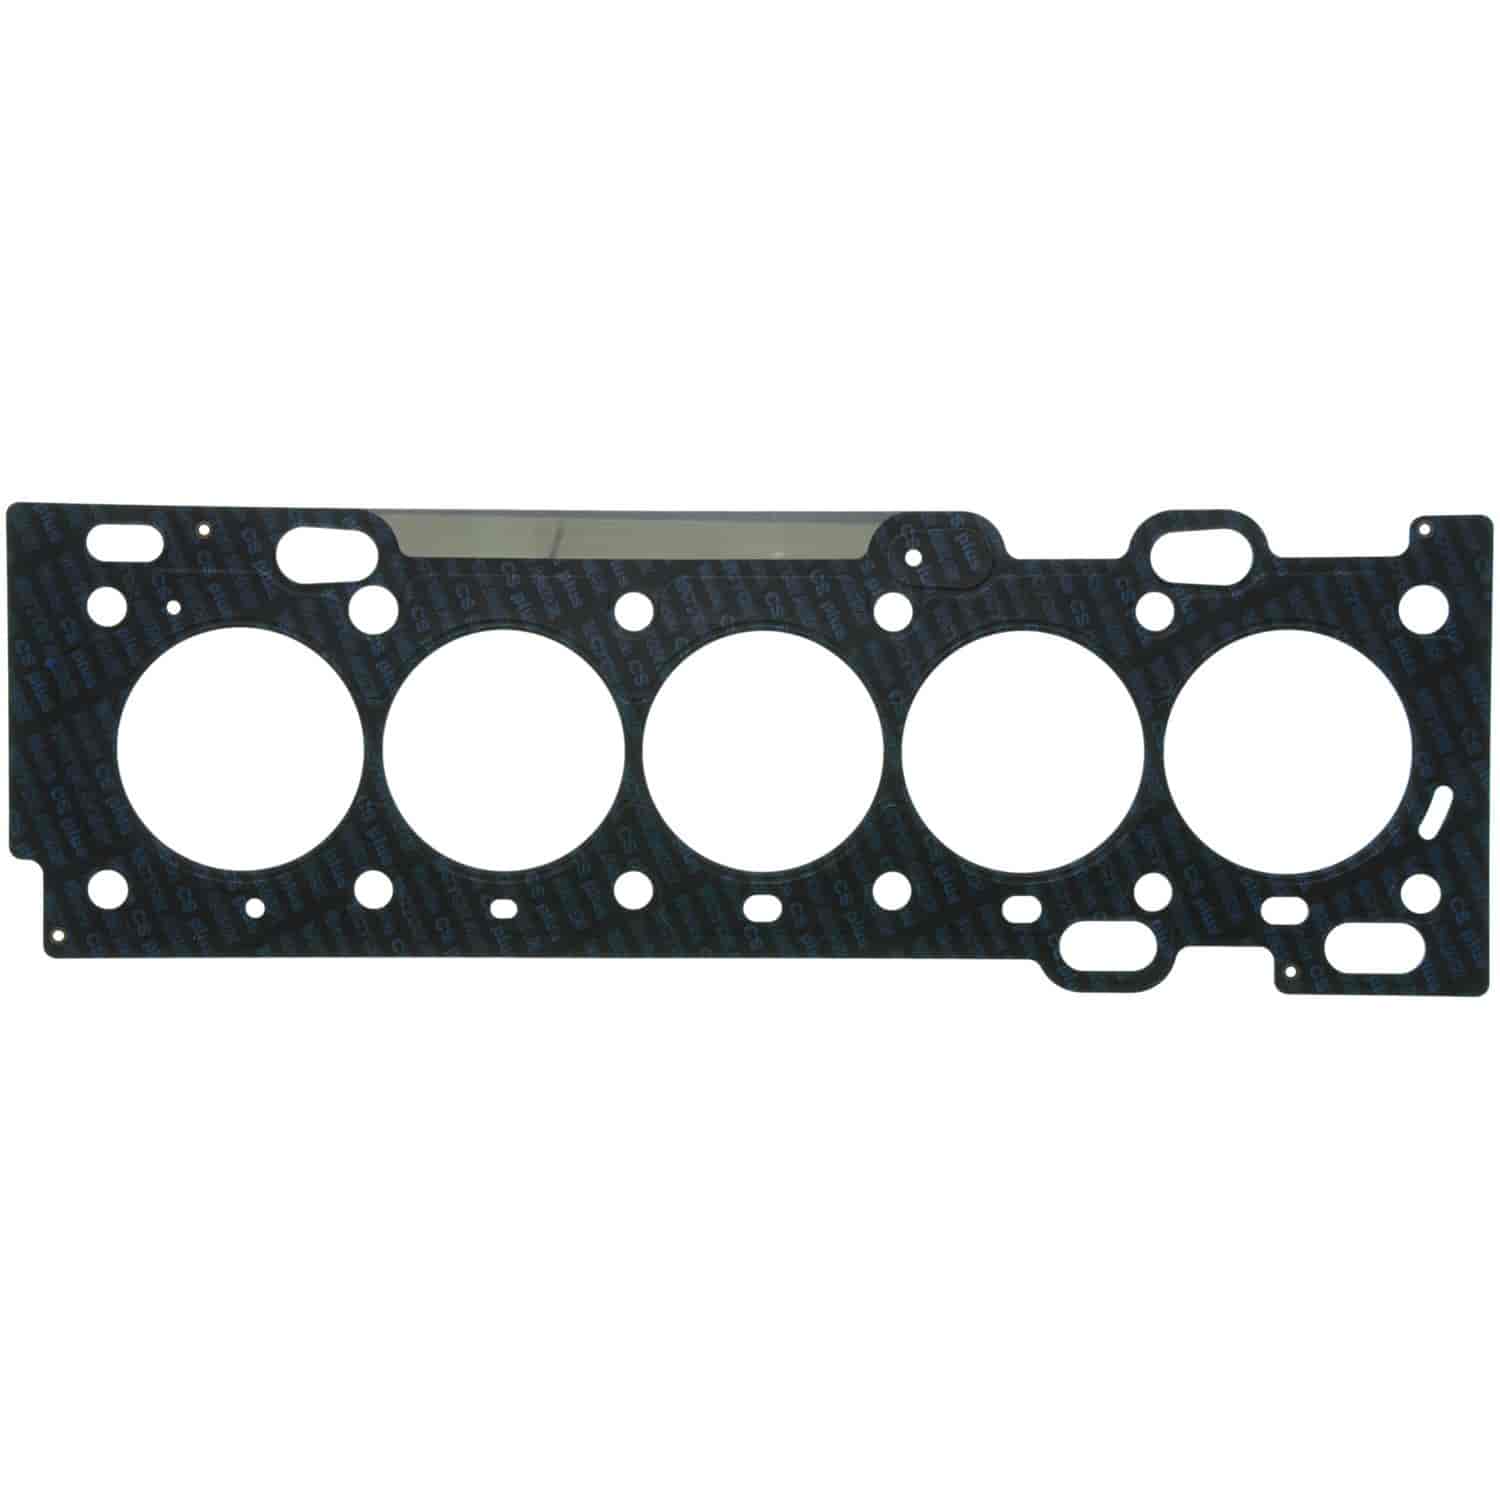 Cylinder Head Gasket Volvo-Pass 2521cc 2.5L B5254T2 L5 2003-2007 From Engine # 2979611